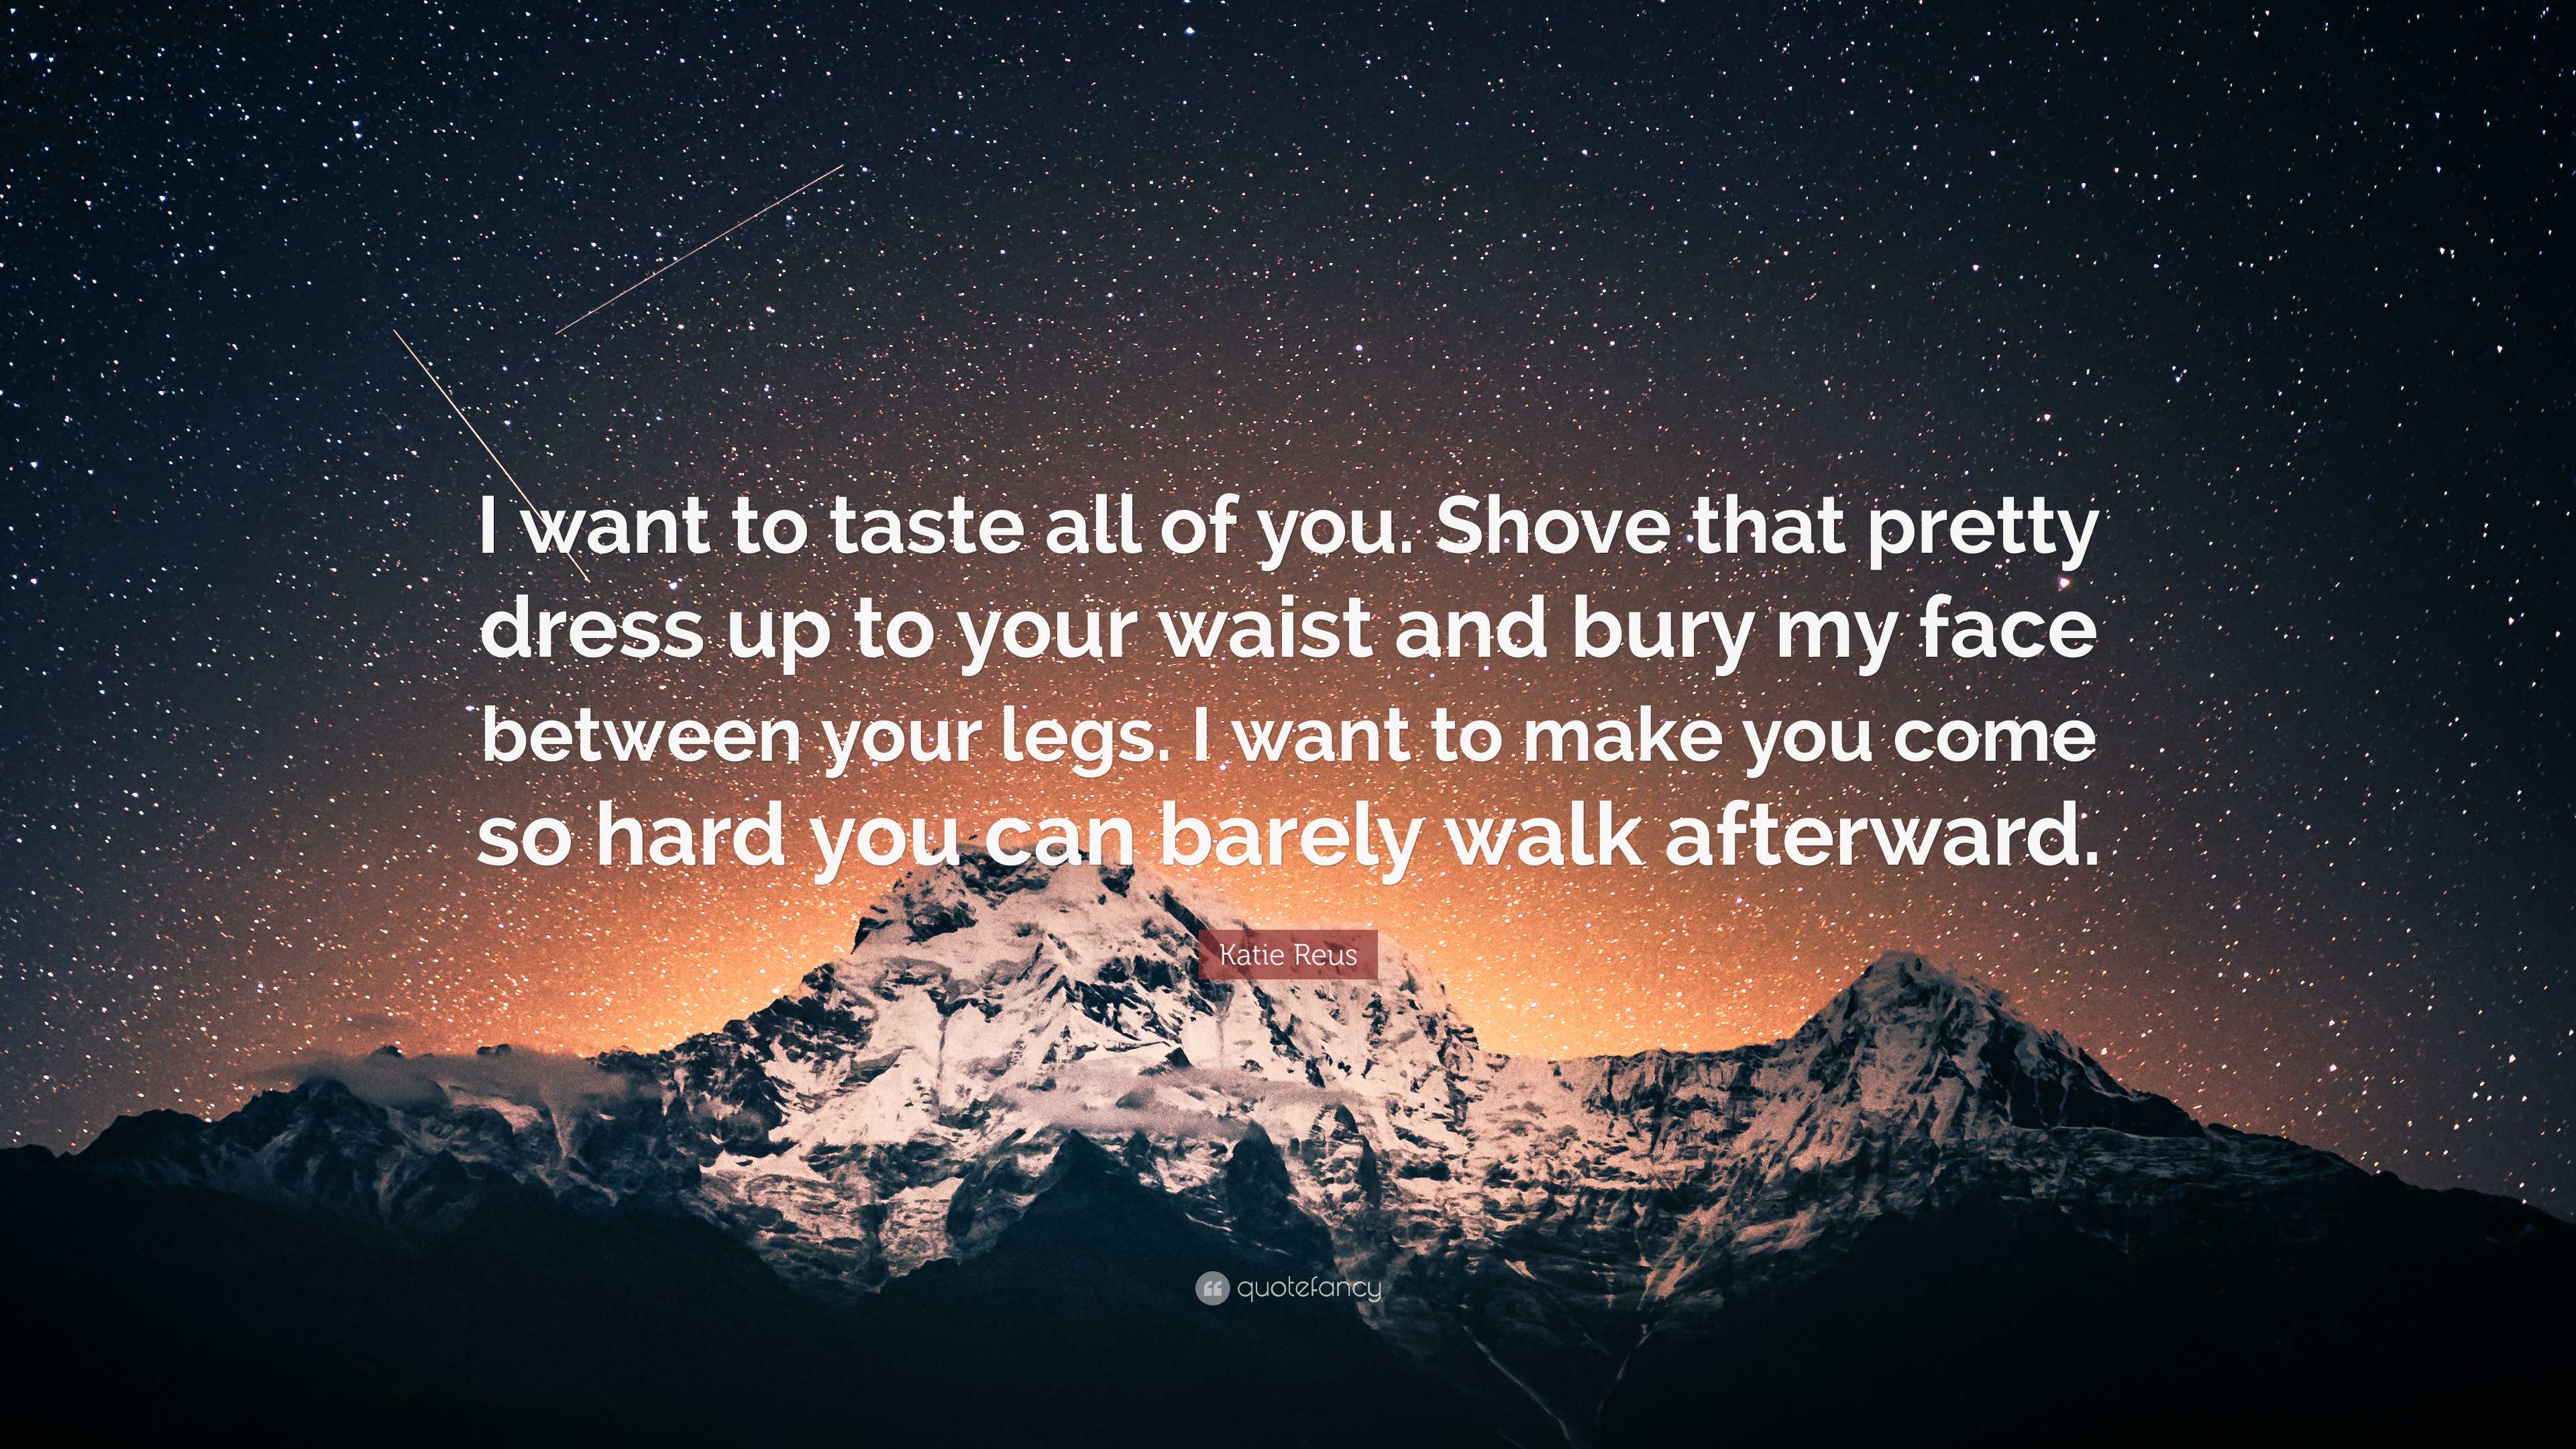 https://quotefancy.com/media/wallpaper/3840x2160/7790035-Katie-Reus-Quote-I-want-to-taste-all-of-you-Shove-that-pretty.jpg